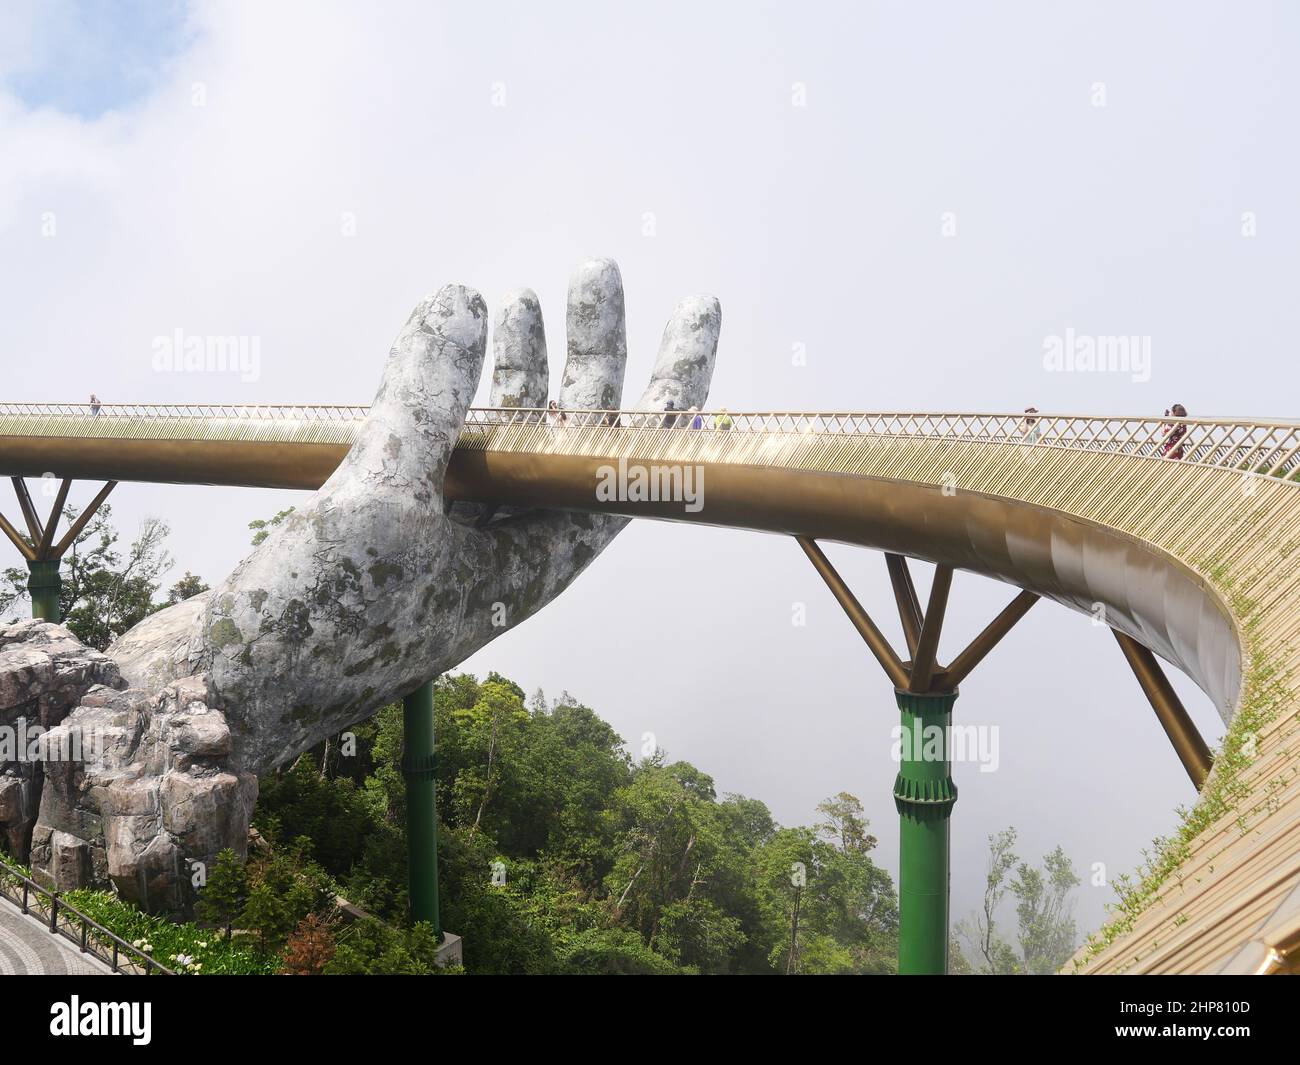 Da Nang, Vietnam - April 12, 2021: Golden Bridge lifted by giant hands in Ba Na Hills, a famous theme park and resort in Central Vietnam Stock Photo